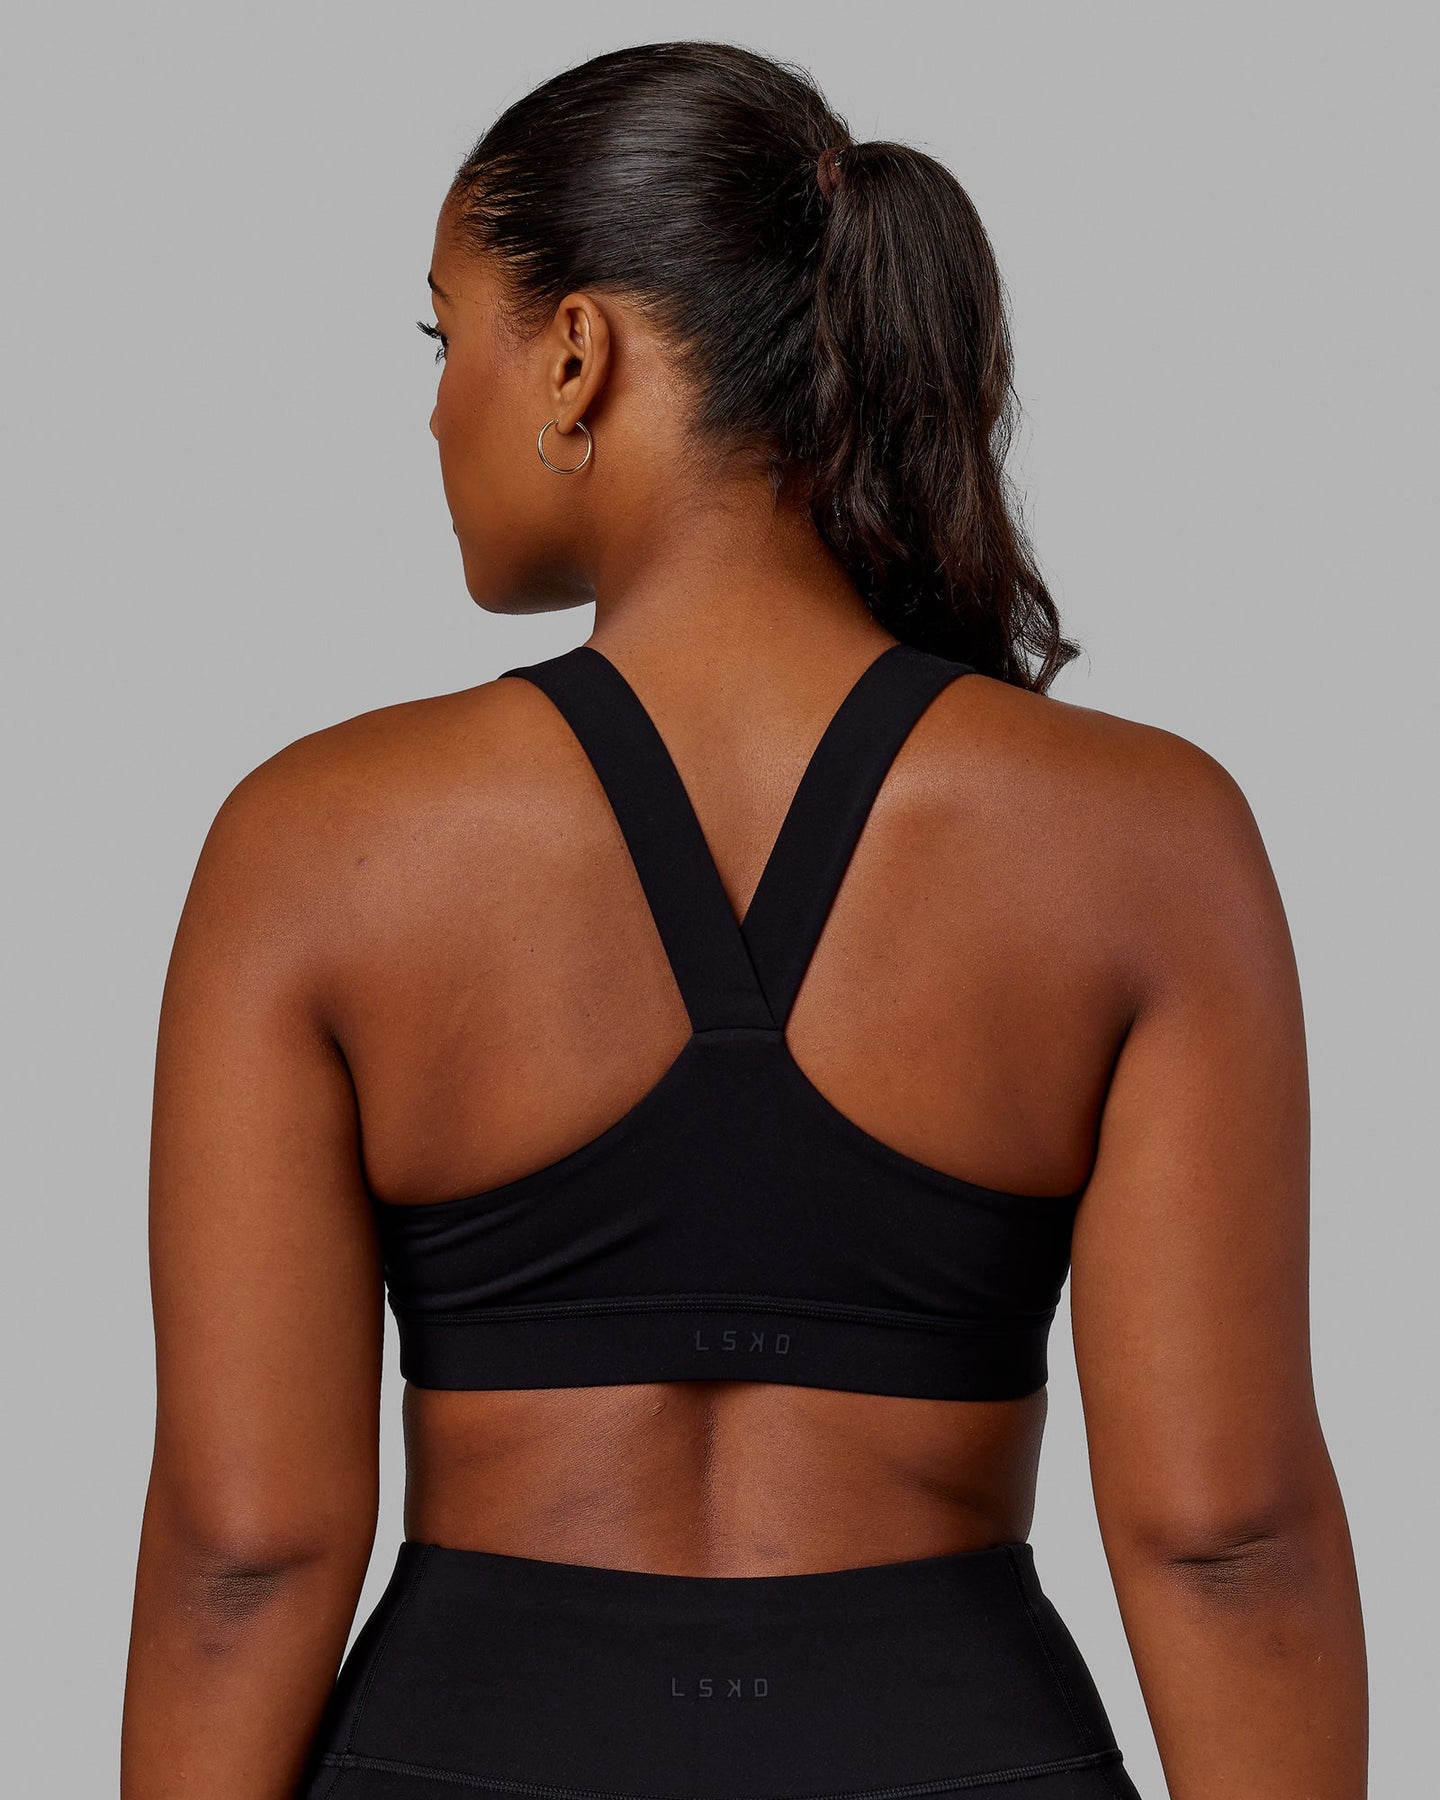 LSKD - The Rep Sports Bra ✔️ Soft and smooth. Simply supportive. Featuring  // 👉 Wider Straps 👉 Fast Drying 👉 Classic 4 Way-Stretch Fabric Rep Now  👇 lskd.co/collections/womens-rep-activewear/products/rep-sports-bra-black-white